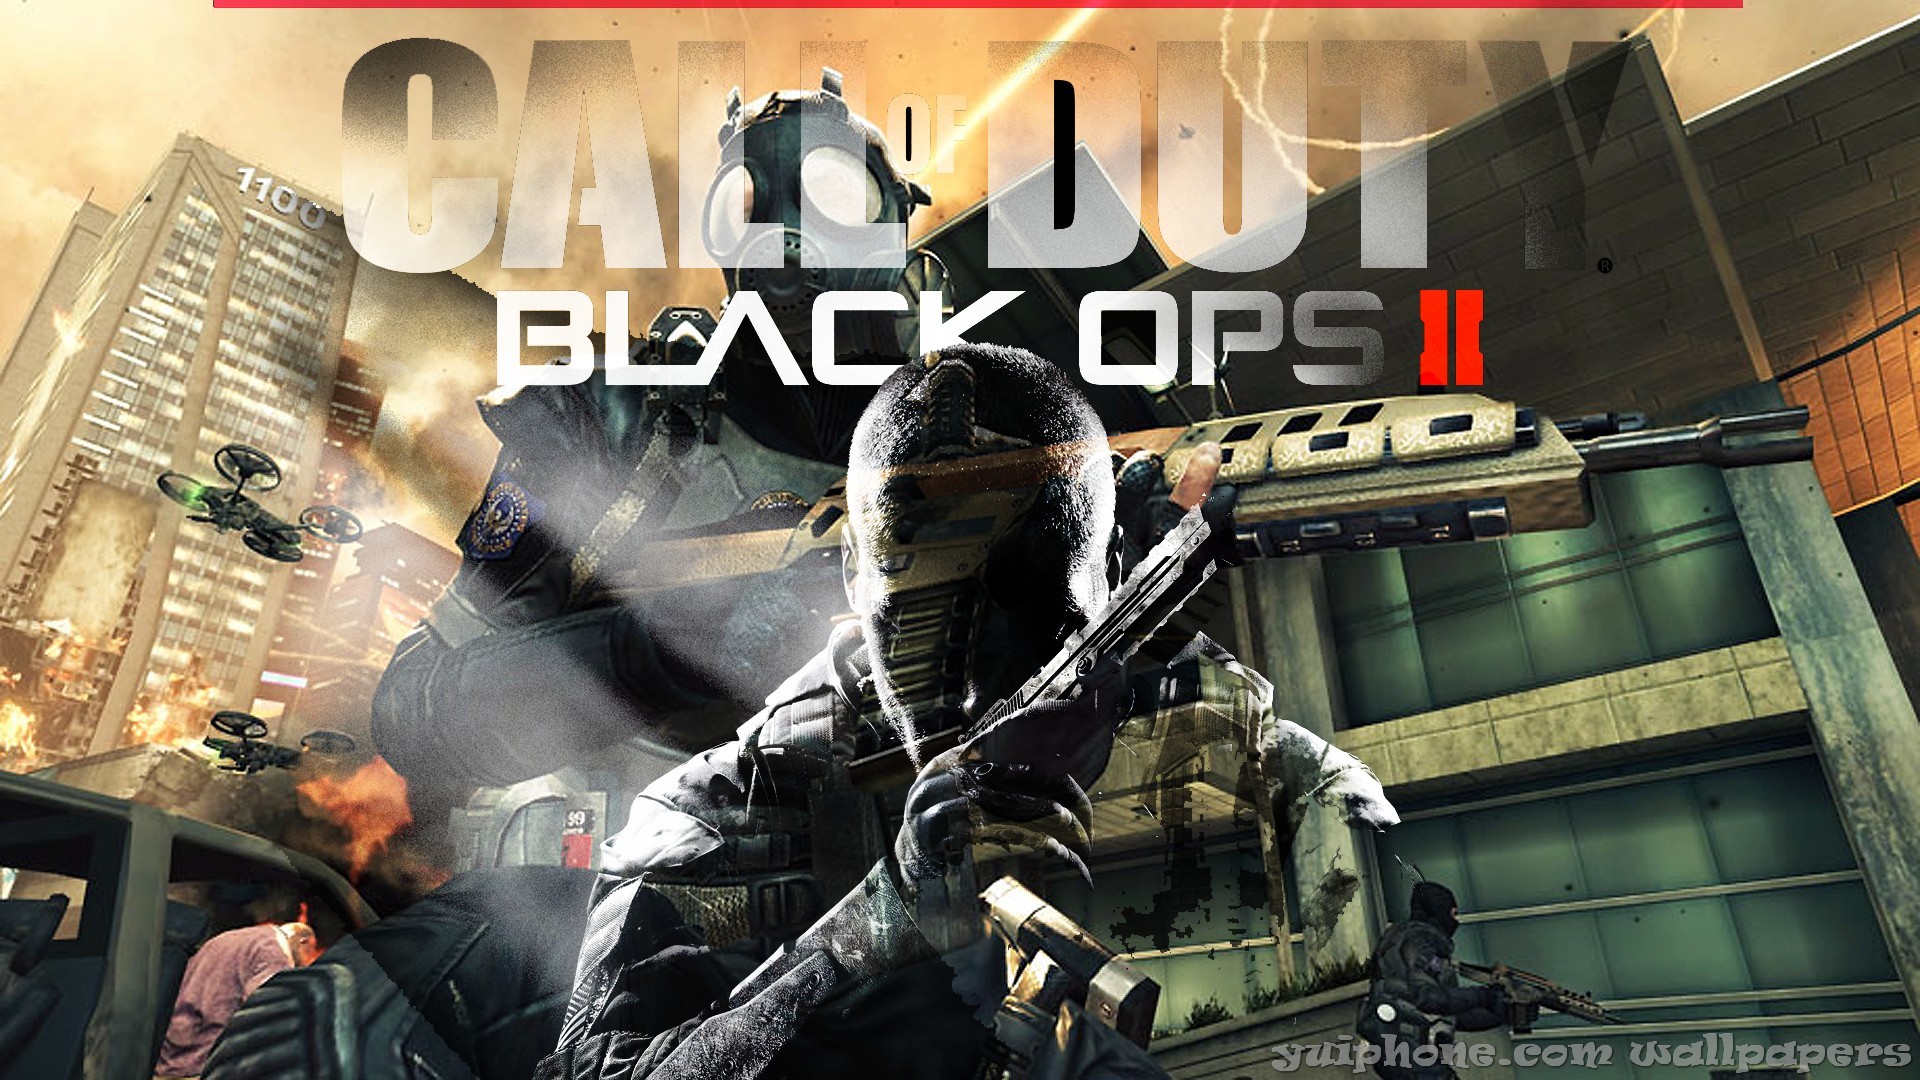 ops 2 zombies wallpaper 1080pBlack Ops 2 HD Wallpapers 1080p Black Ops ..